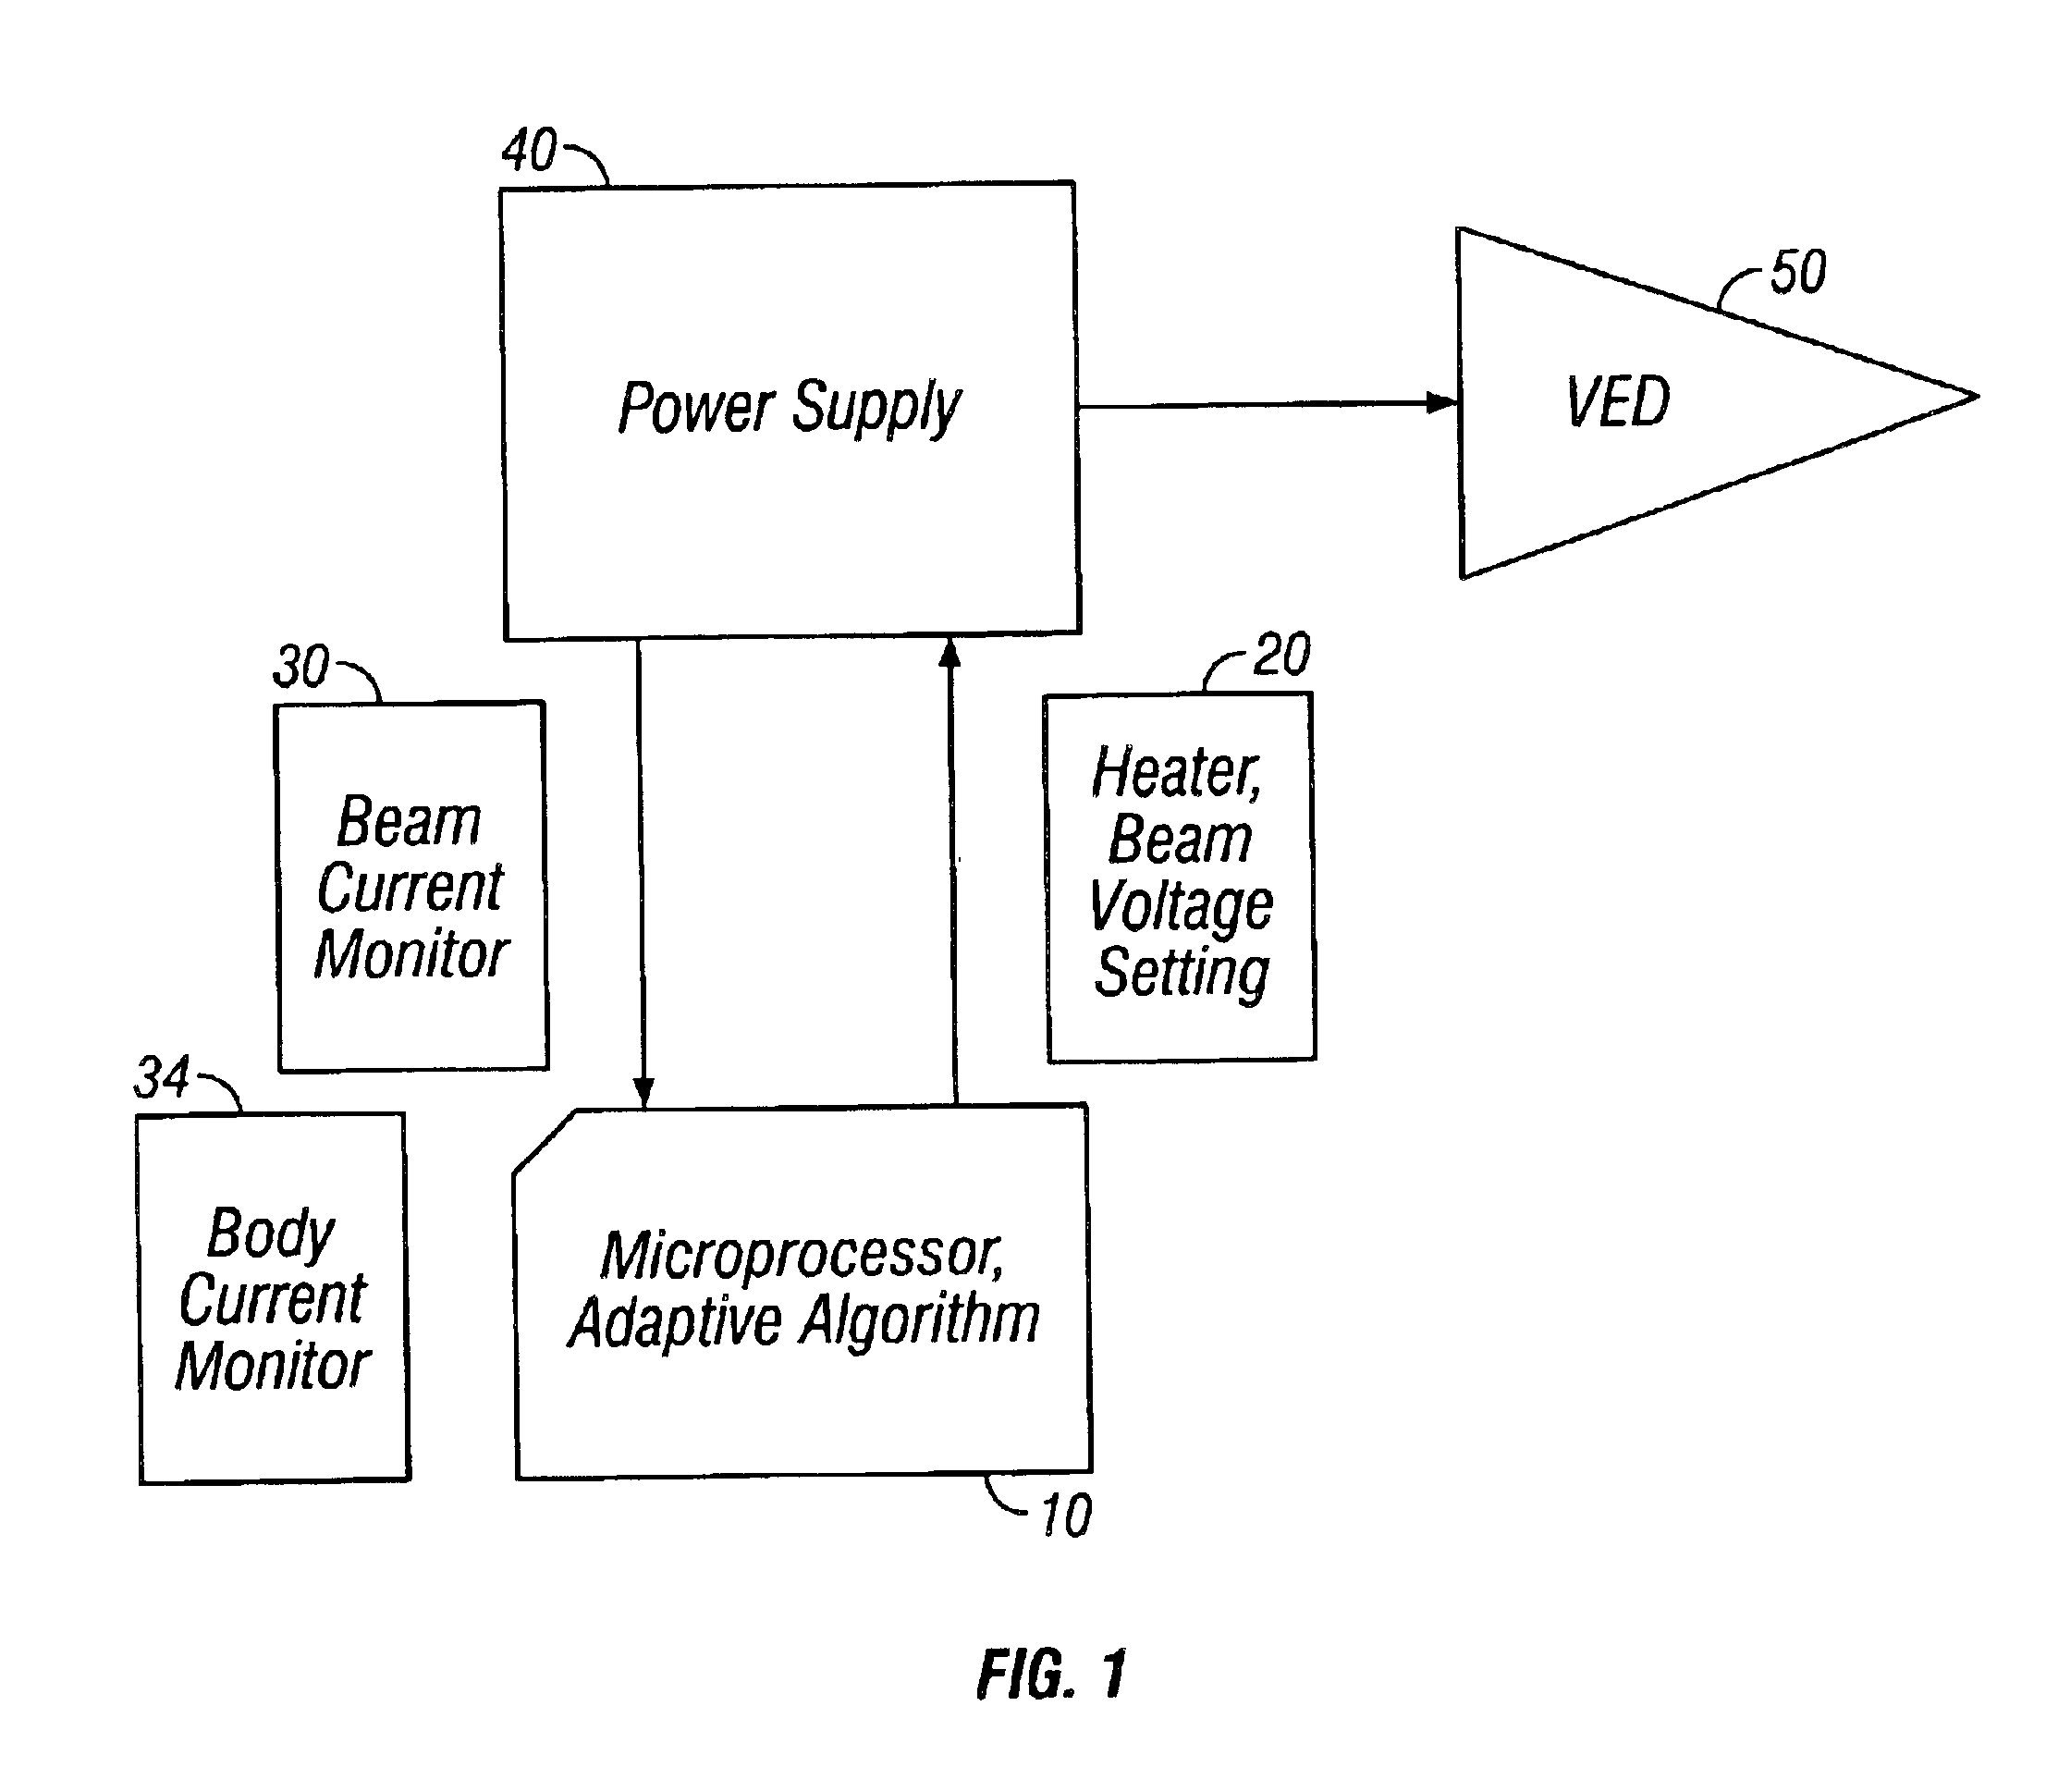 Multiple stage depressed collector (MSDC) klystron based amplifier for ground based satellite and terrestrial communications